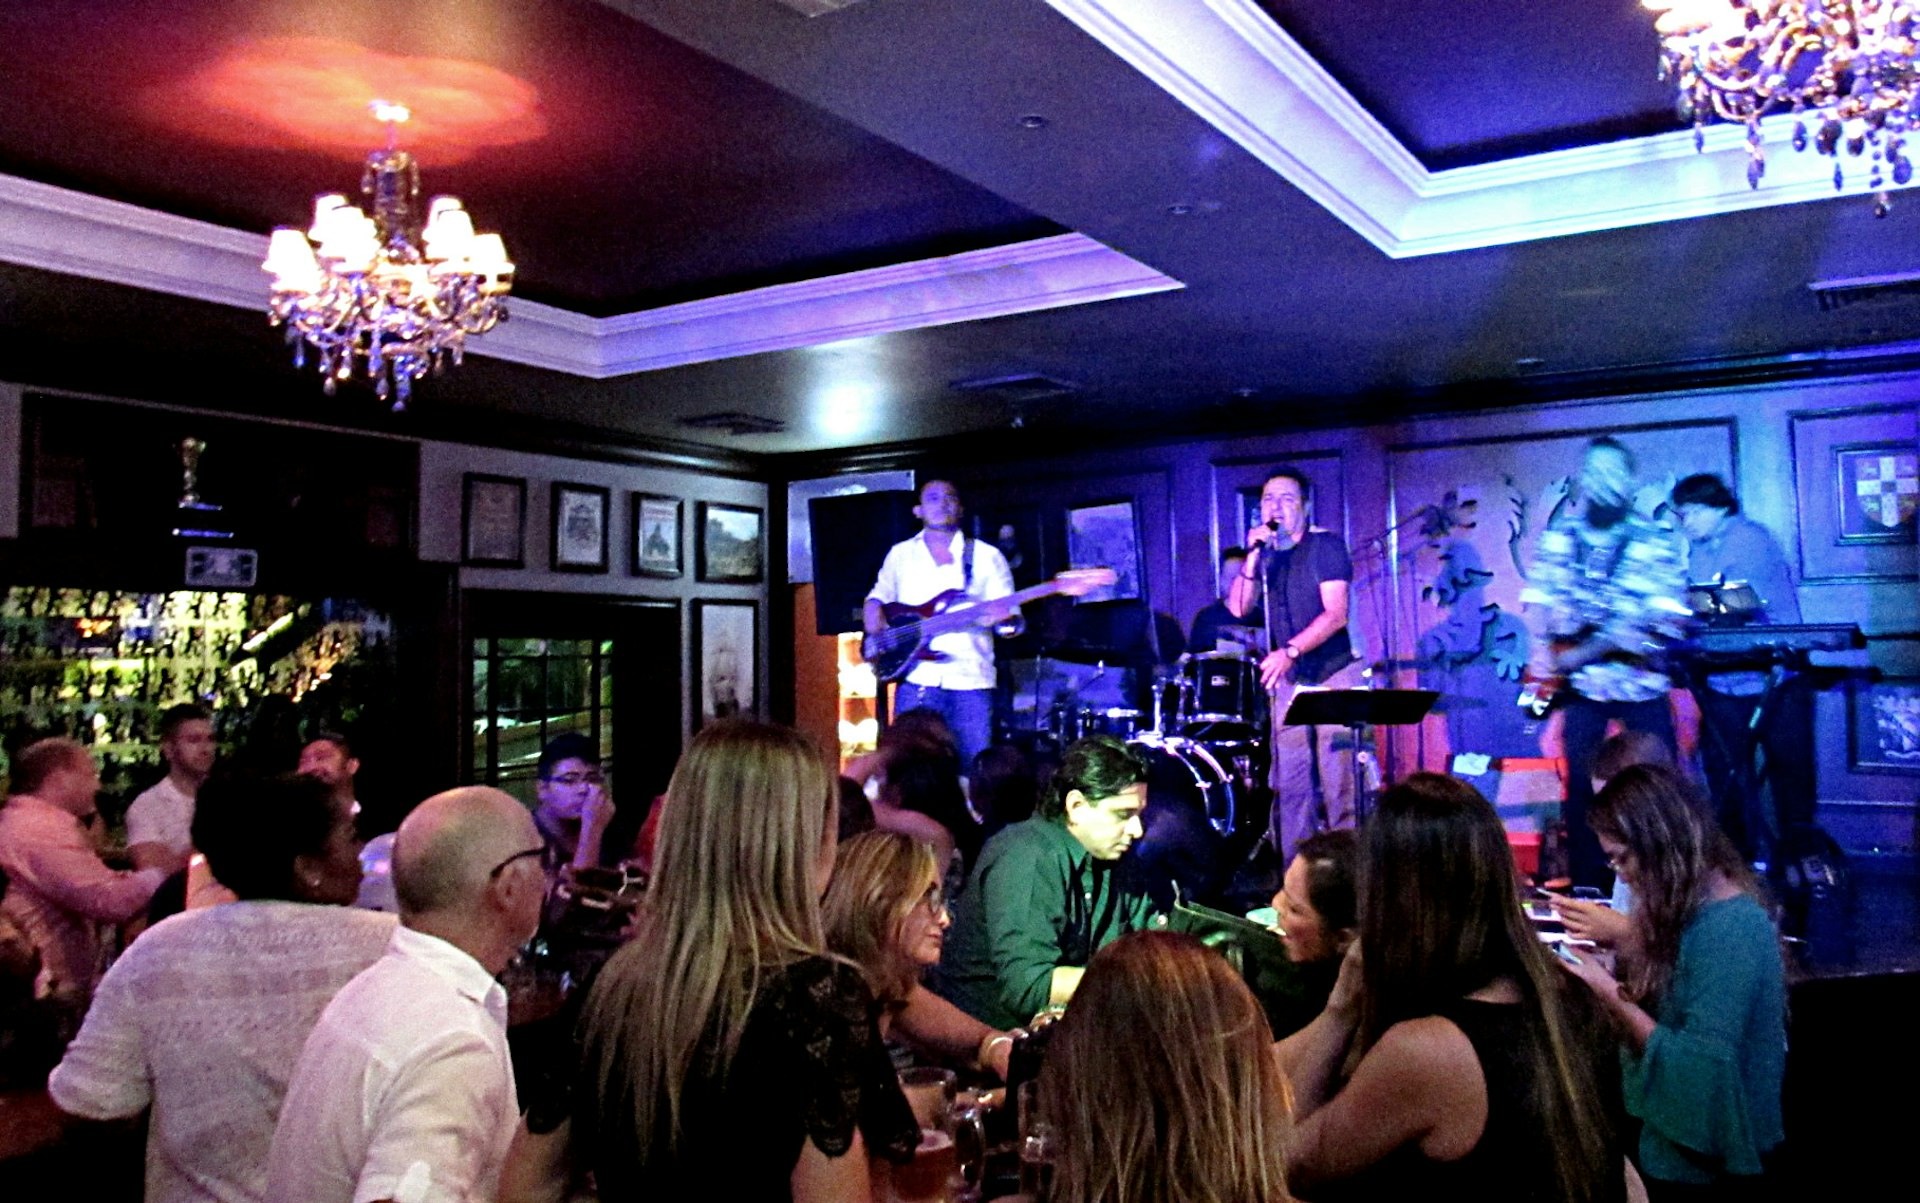 Live music is the thing at The Black Pub © Laura Winfree/Lonely Planet